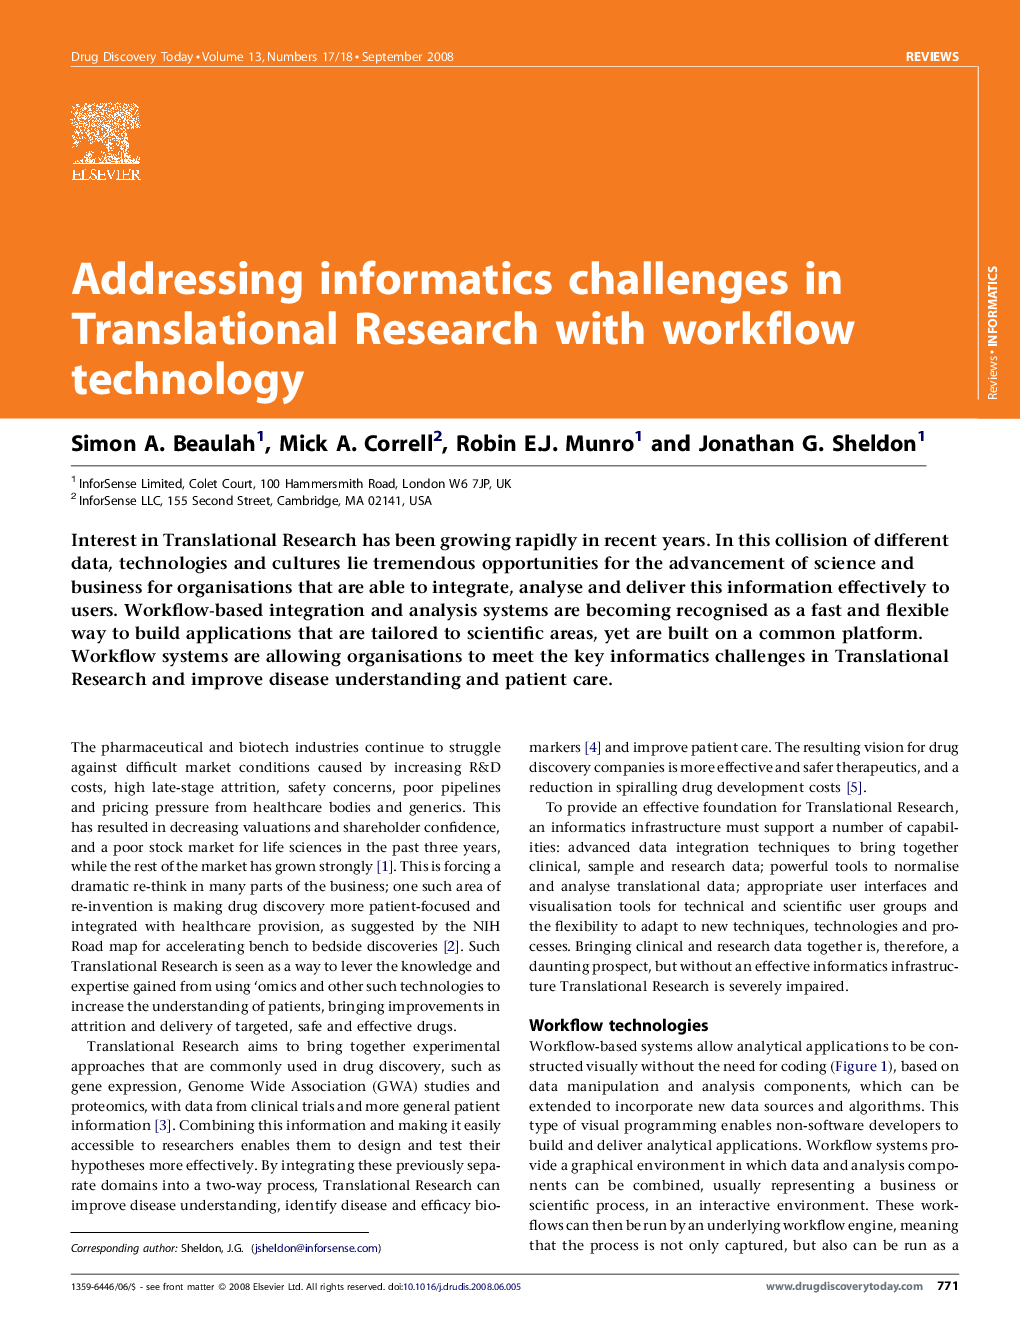 Addressing informatics challenges in Translational Research with workflow technology